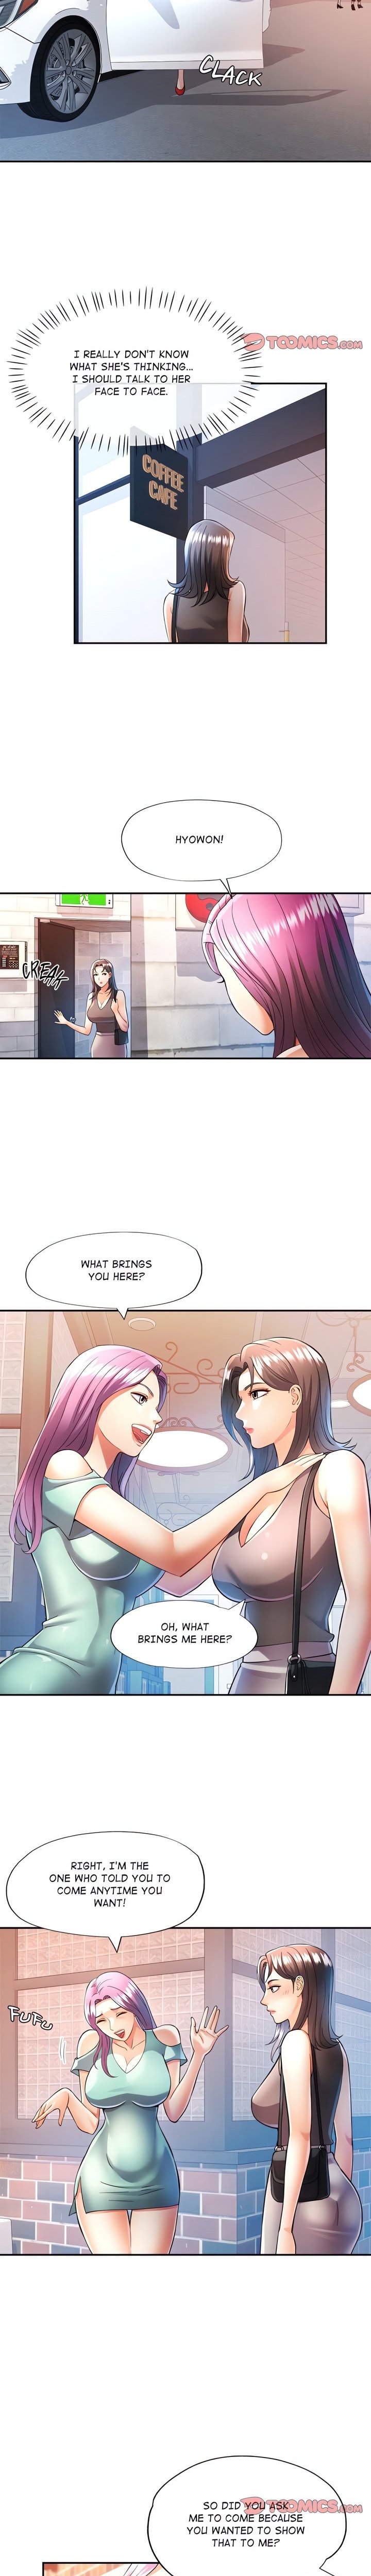 in-her-place-chap-26-6